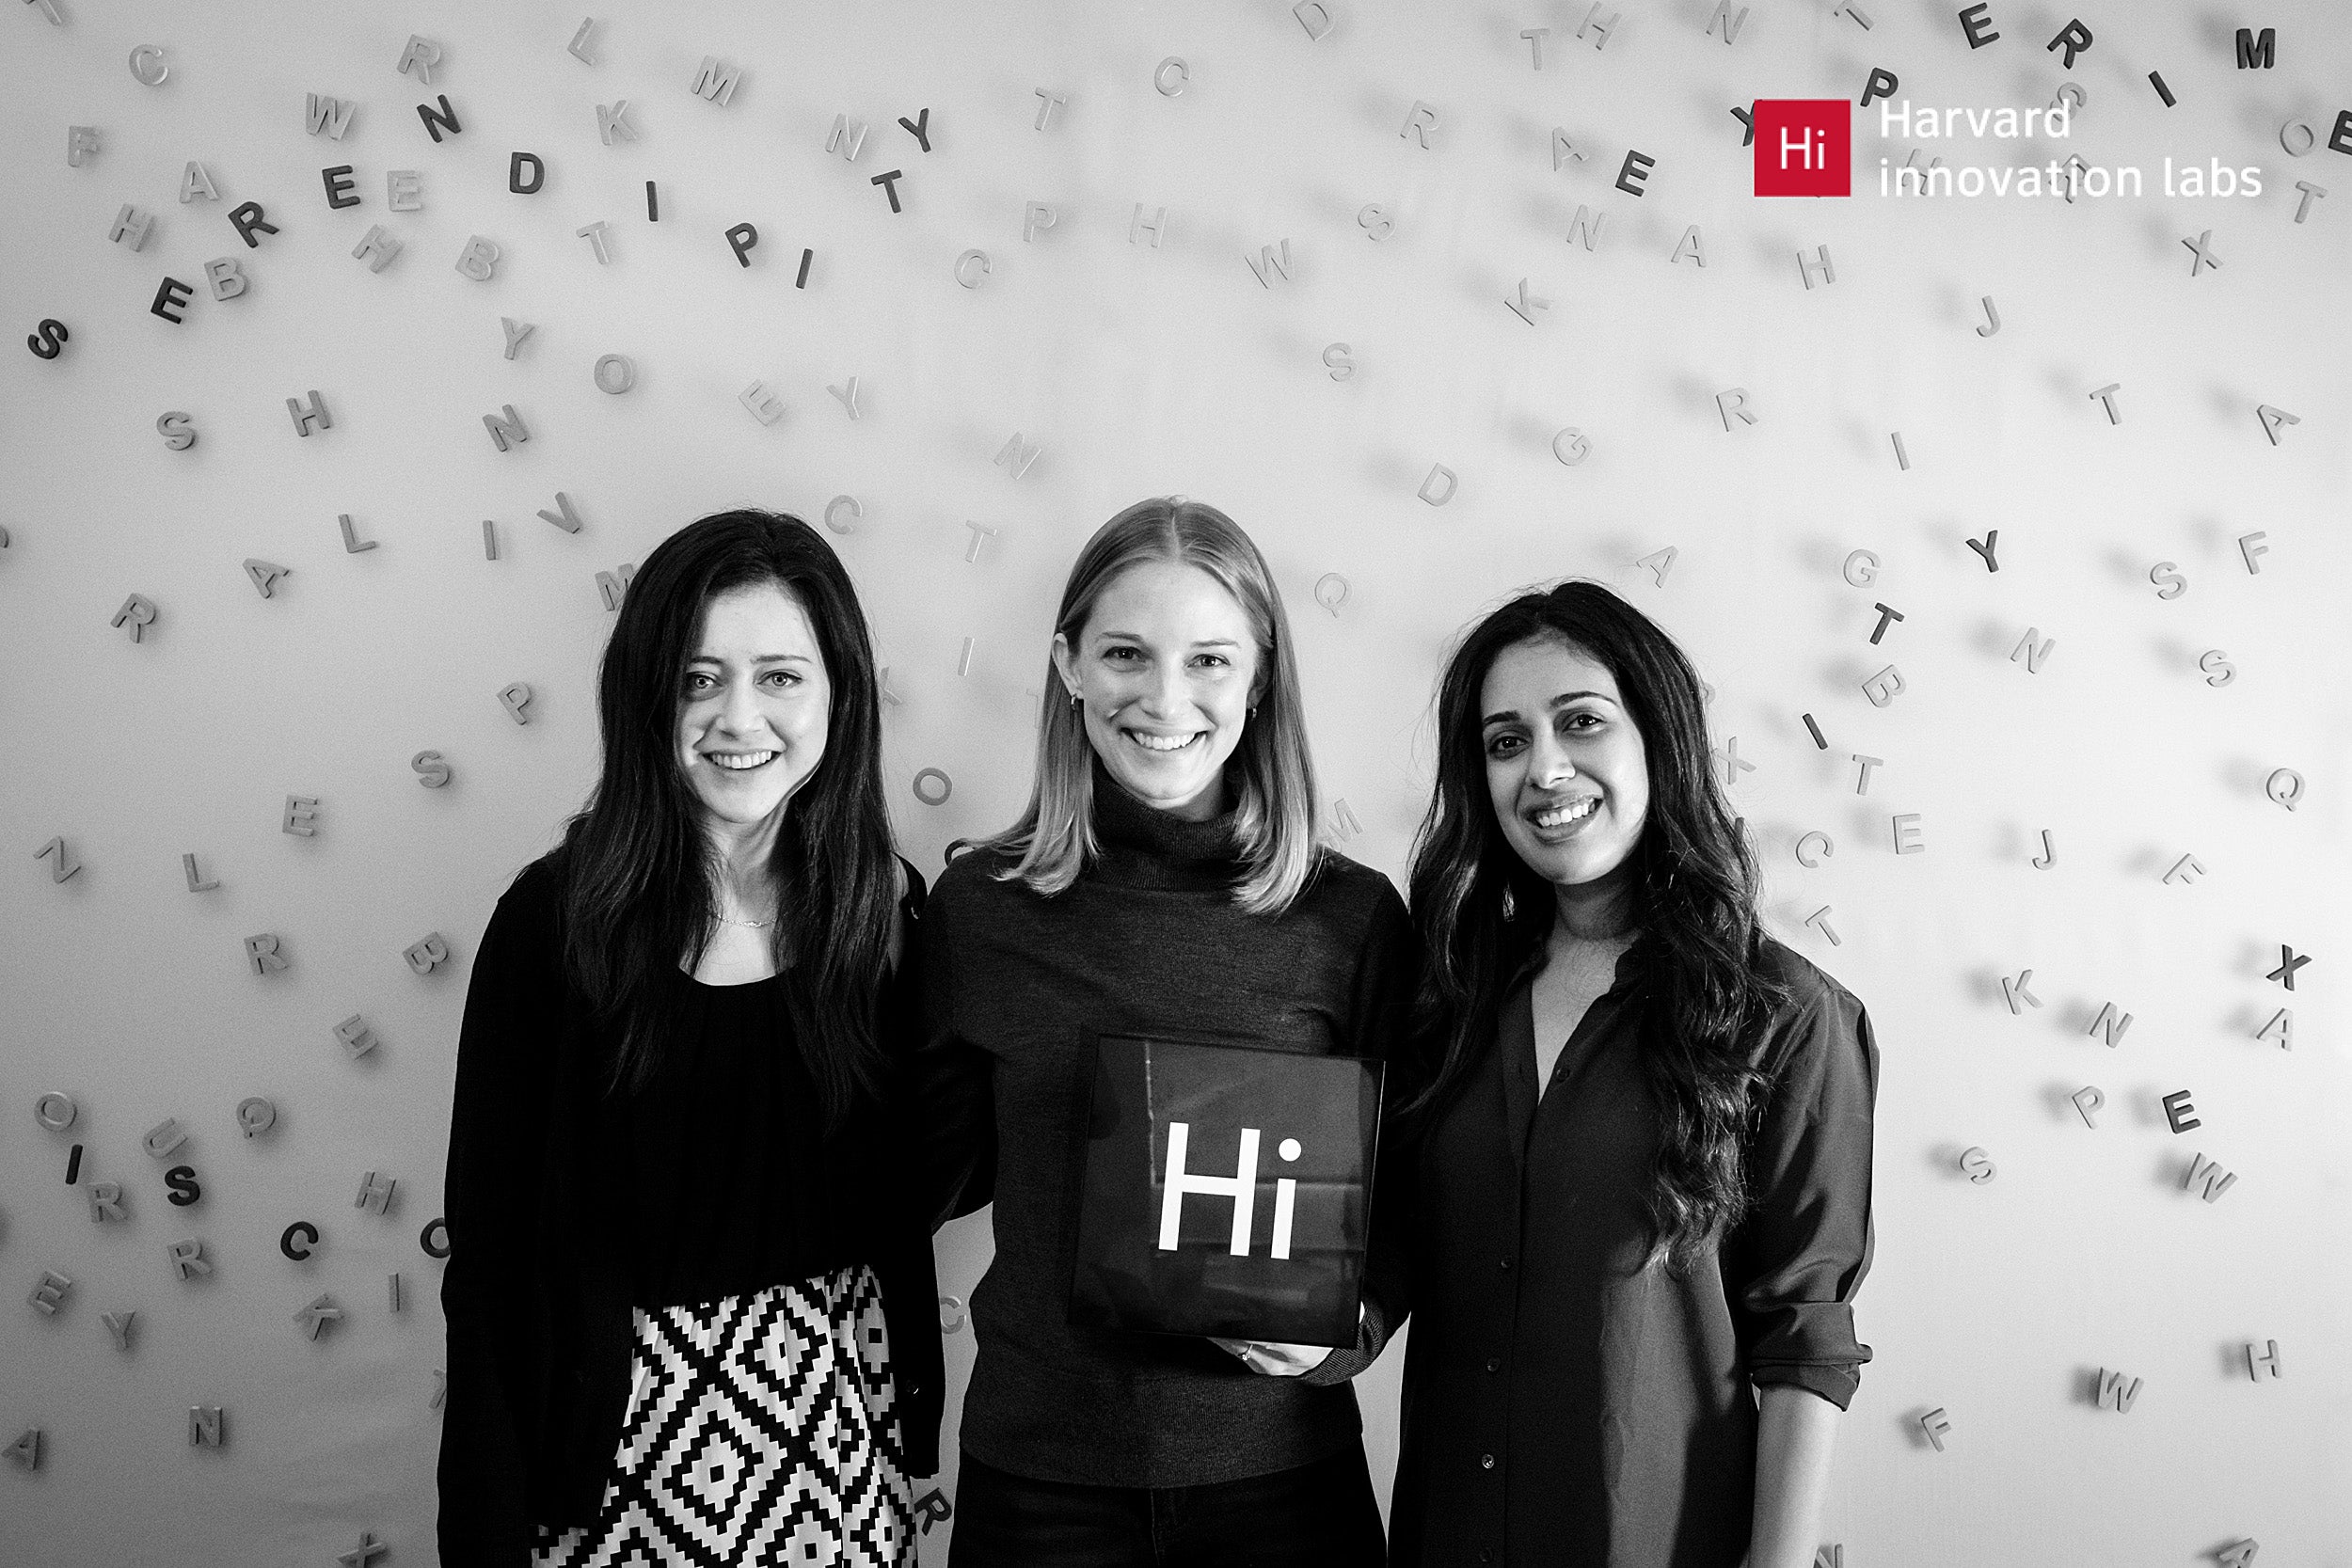 Three women standing together holding a small sign that reads "Hi"